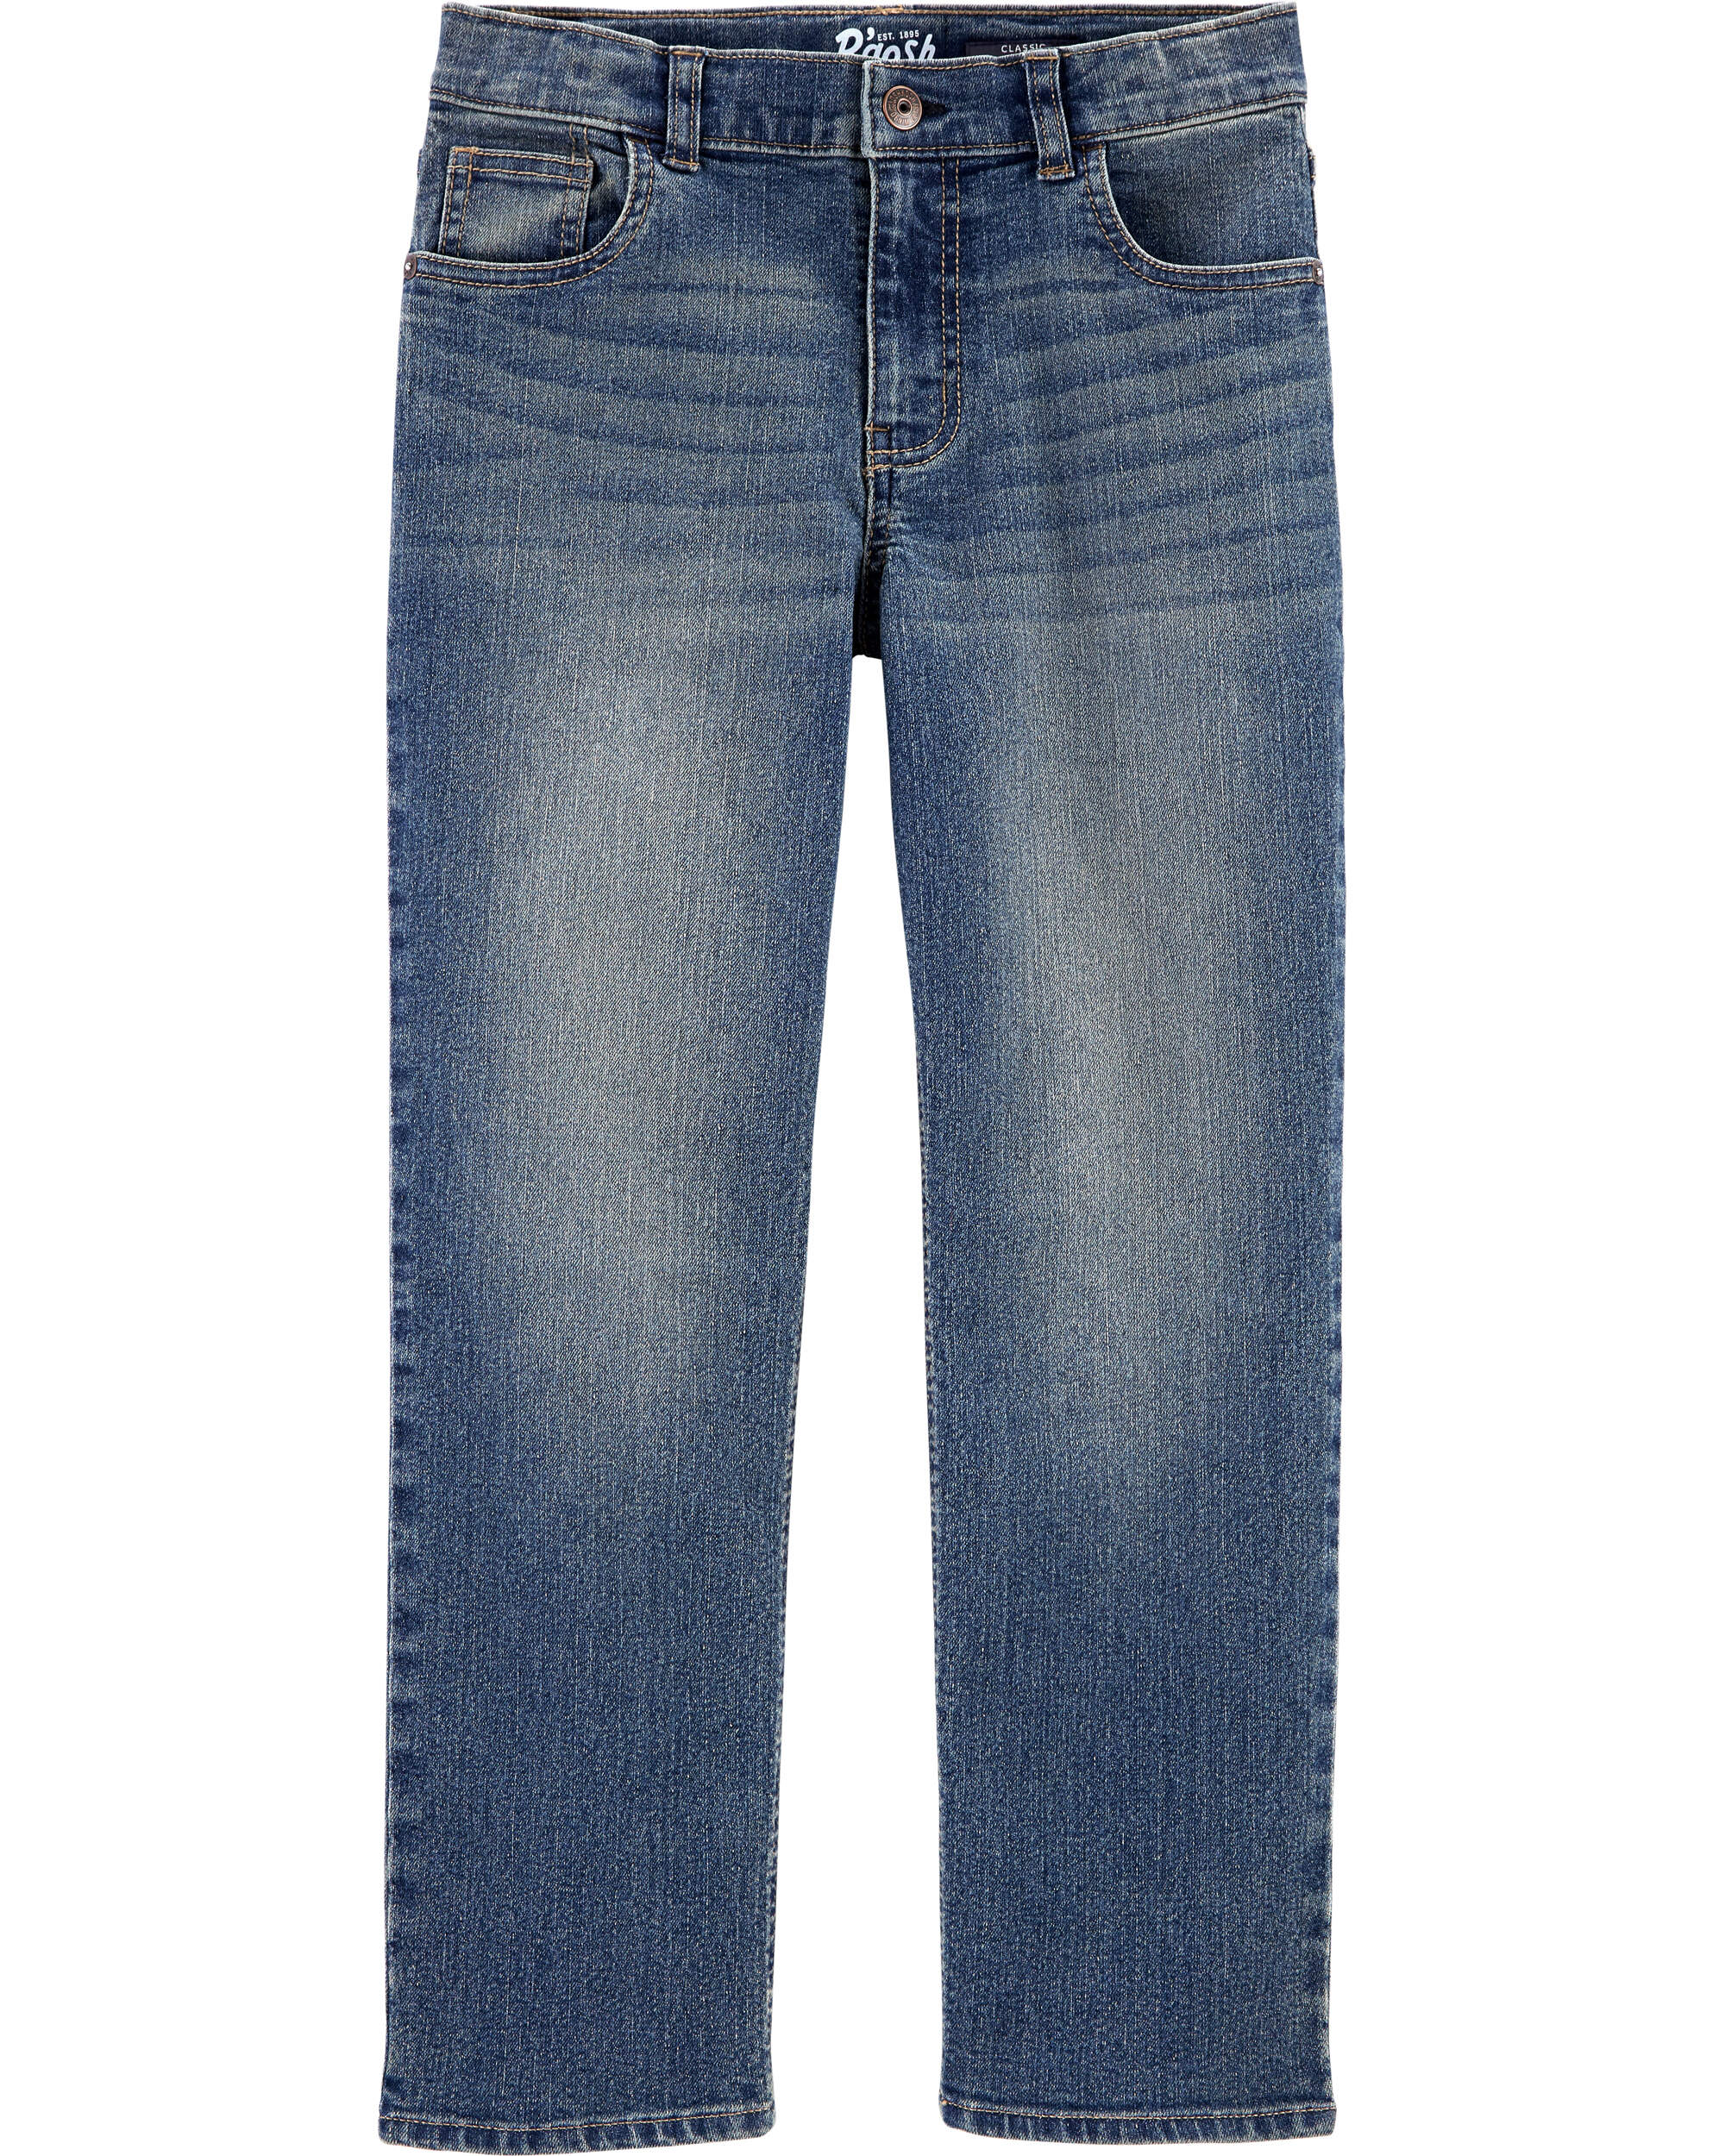 Classic Jeans In Tumbled Medium Faded Wash